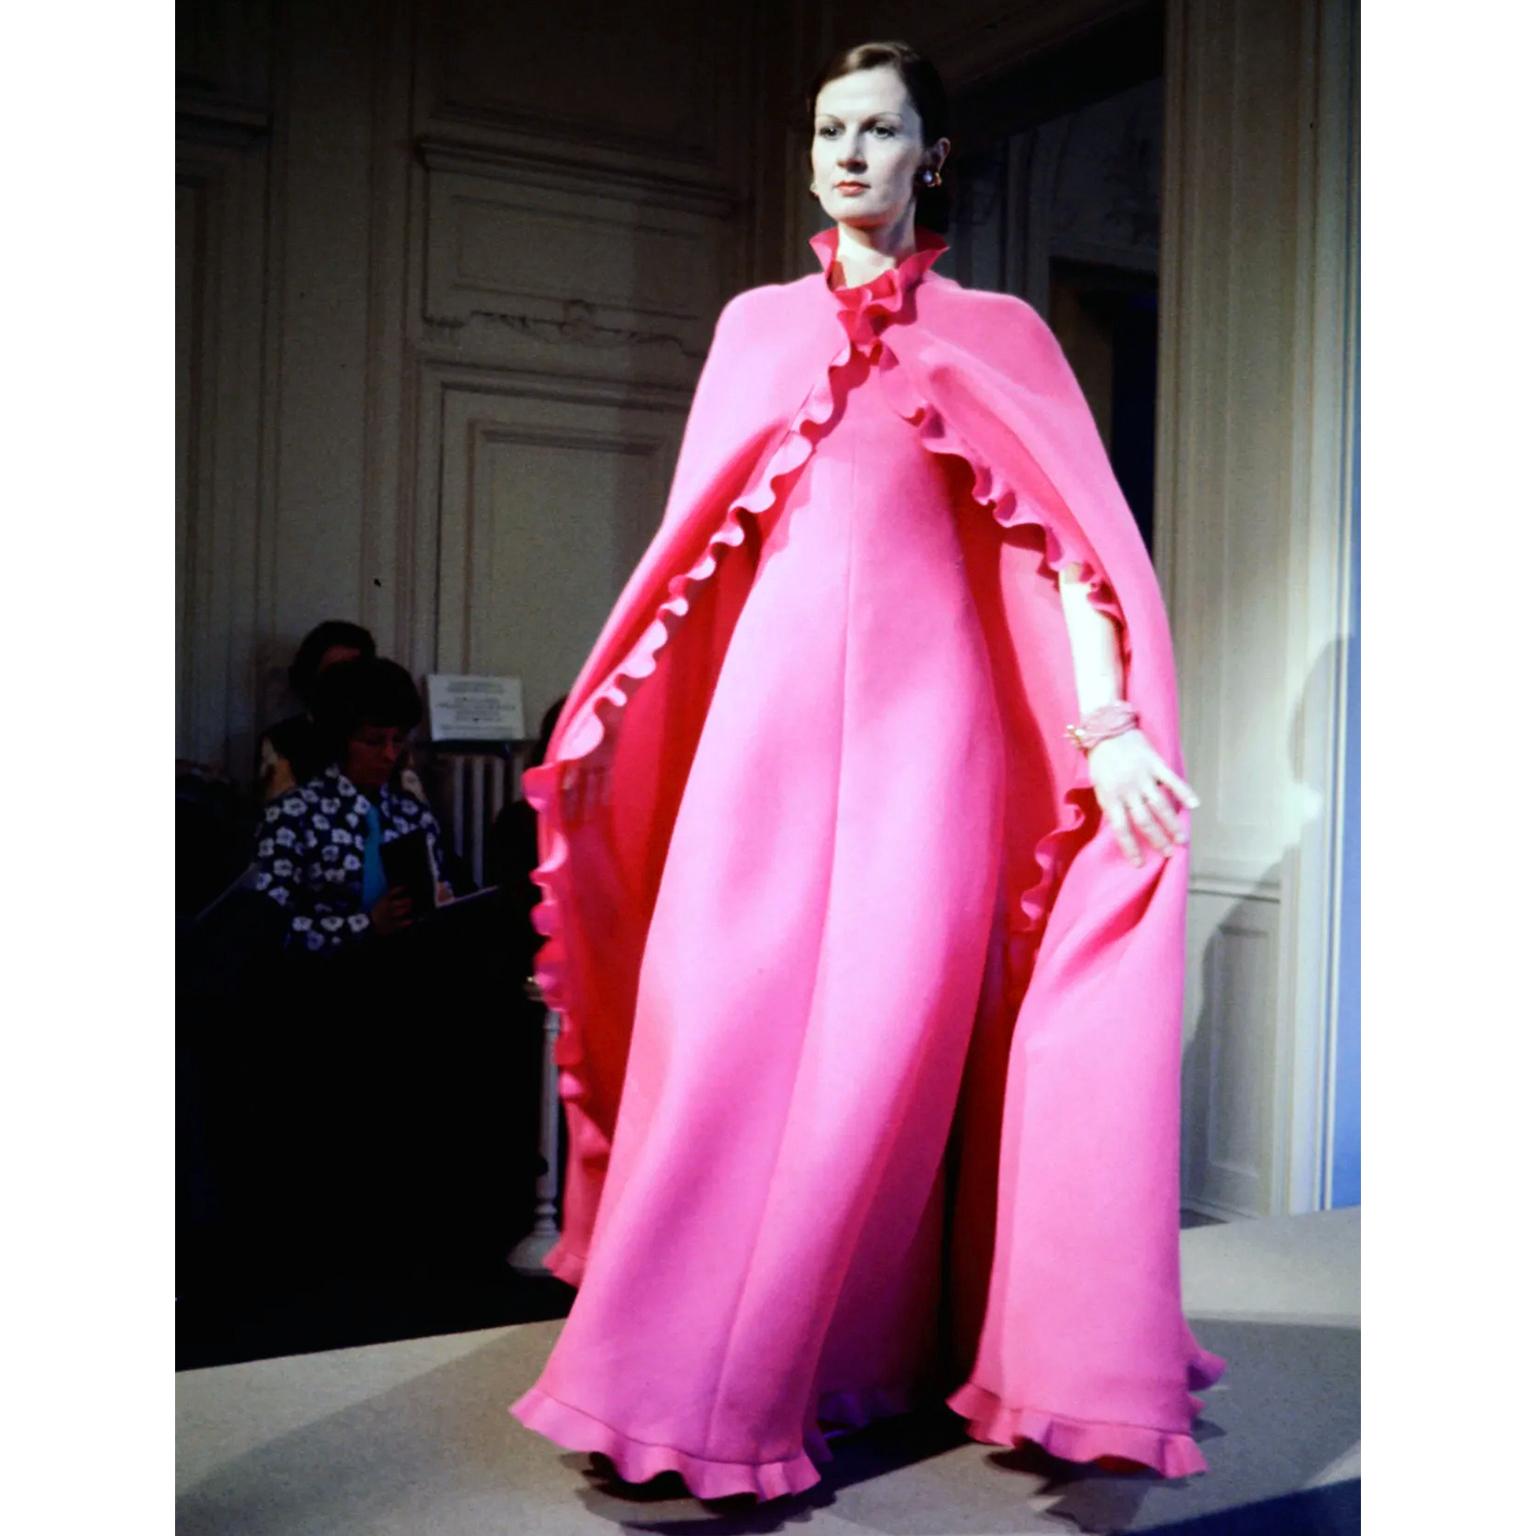 1971 Christian Dior Haute Couture Pink Ruffled Runway Evening Dress Grace Kelly  For Sale 10